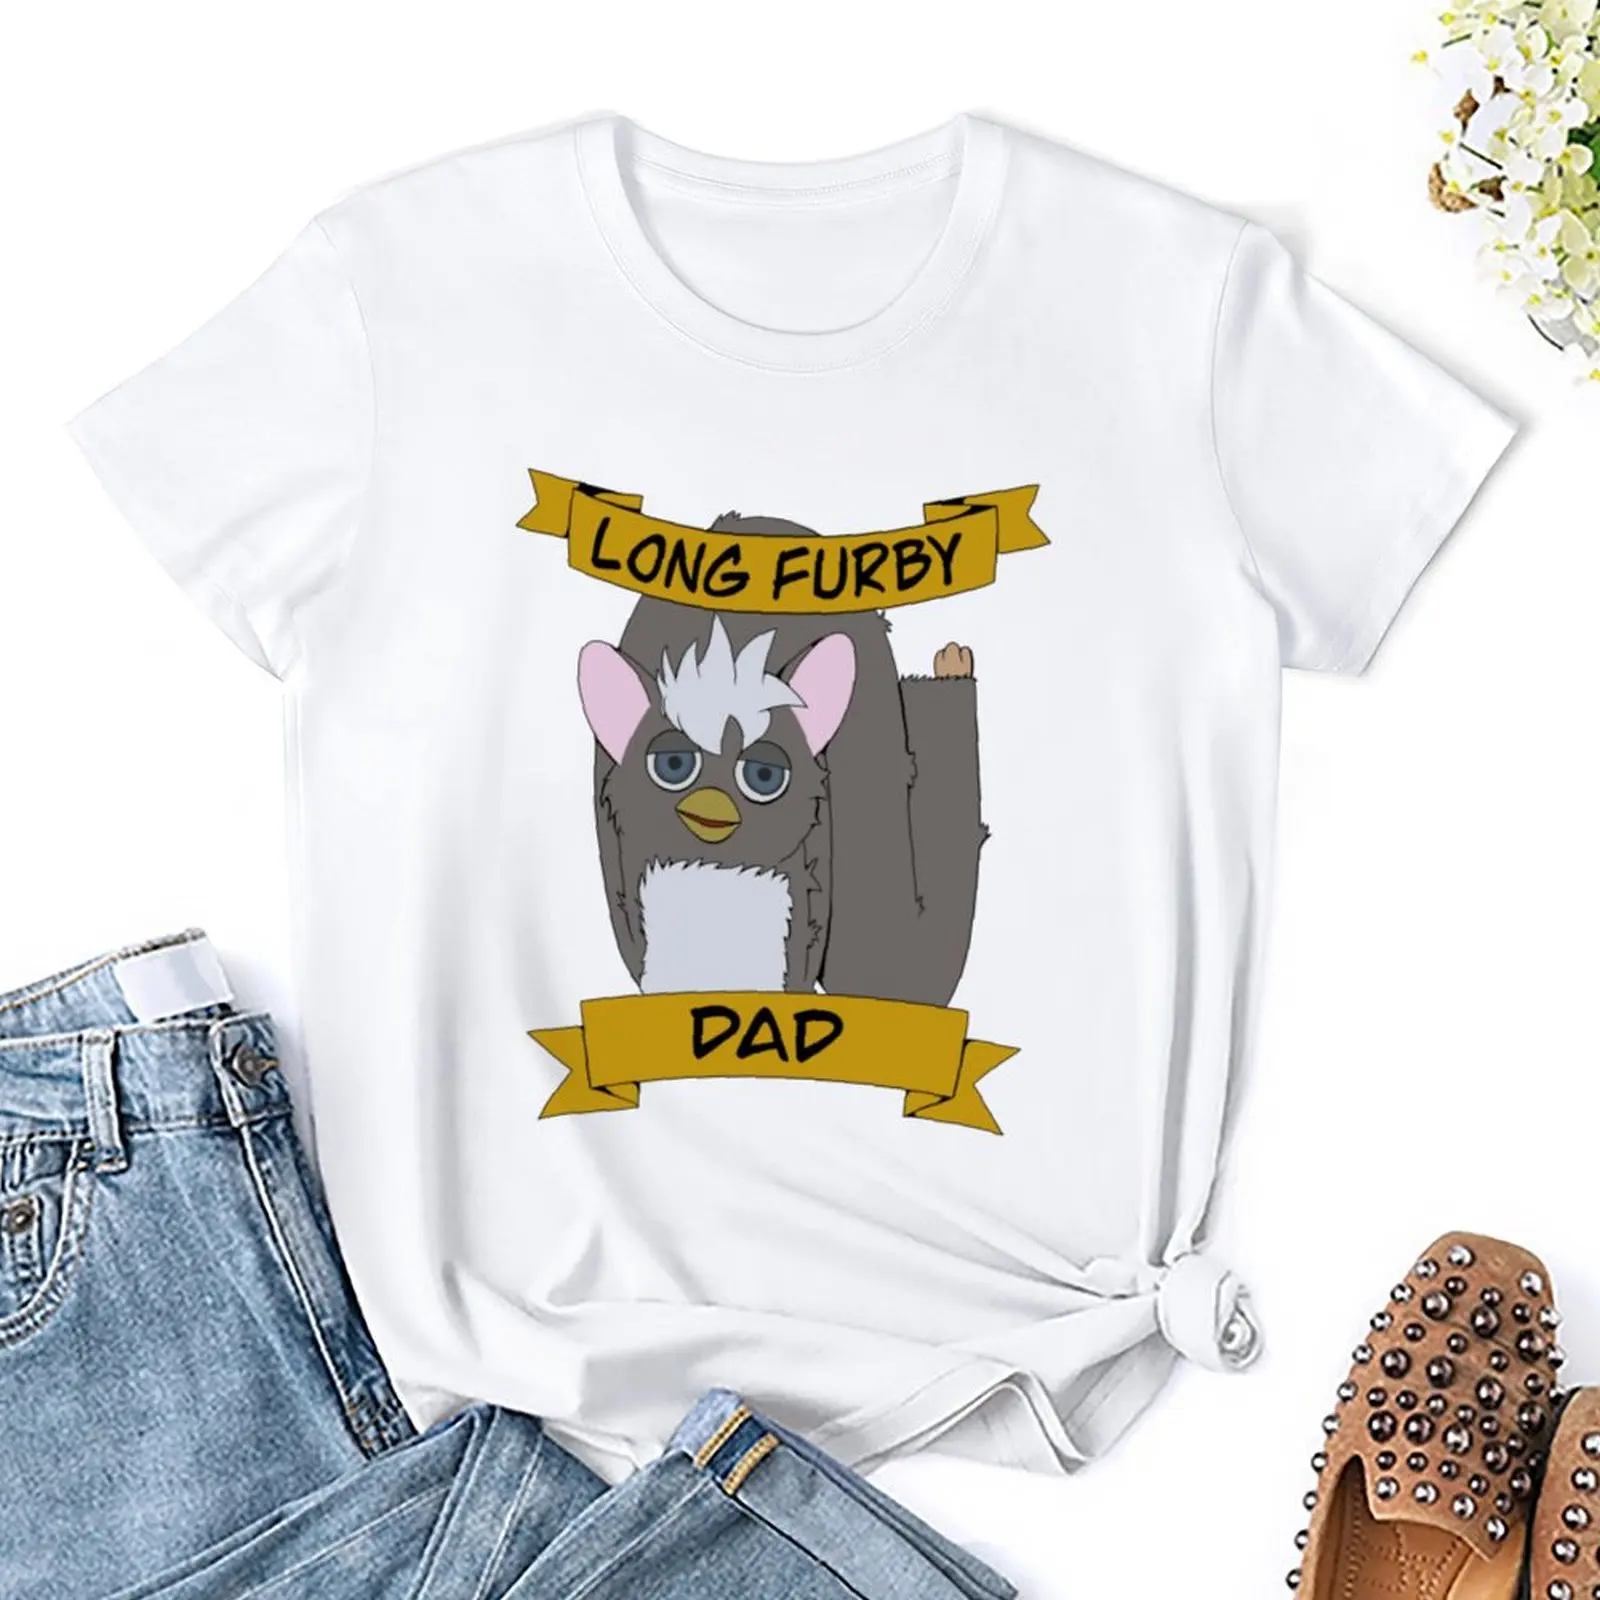 Long furby dad t-shirt anime clothes kawaii clothes tees tops for Women